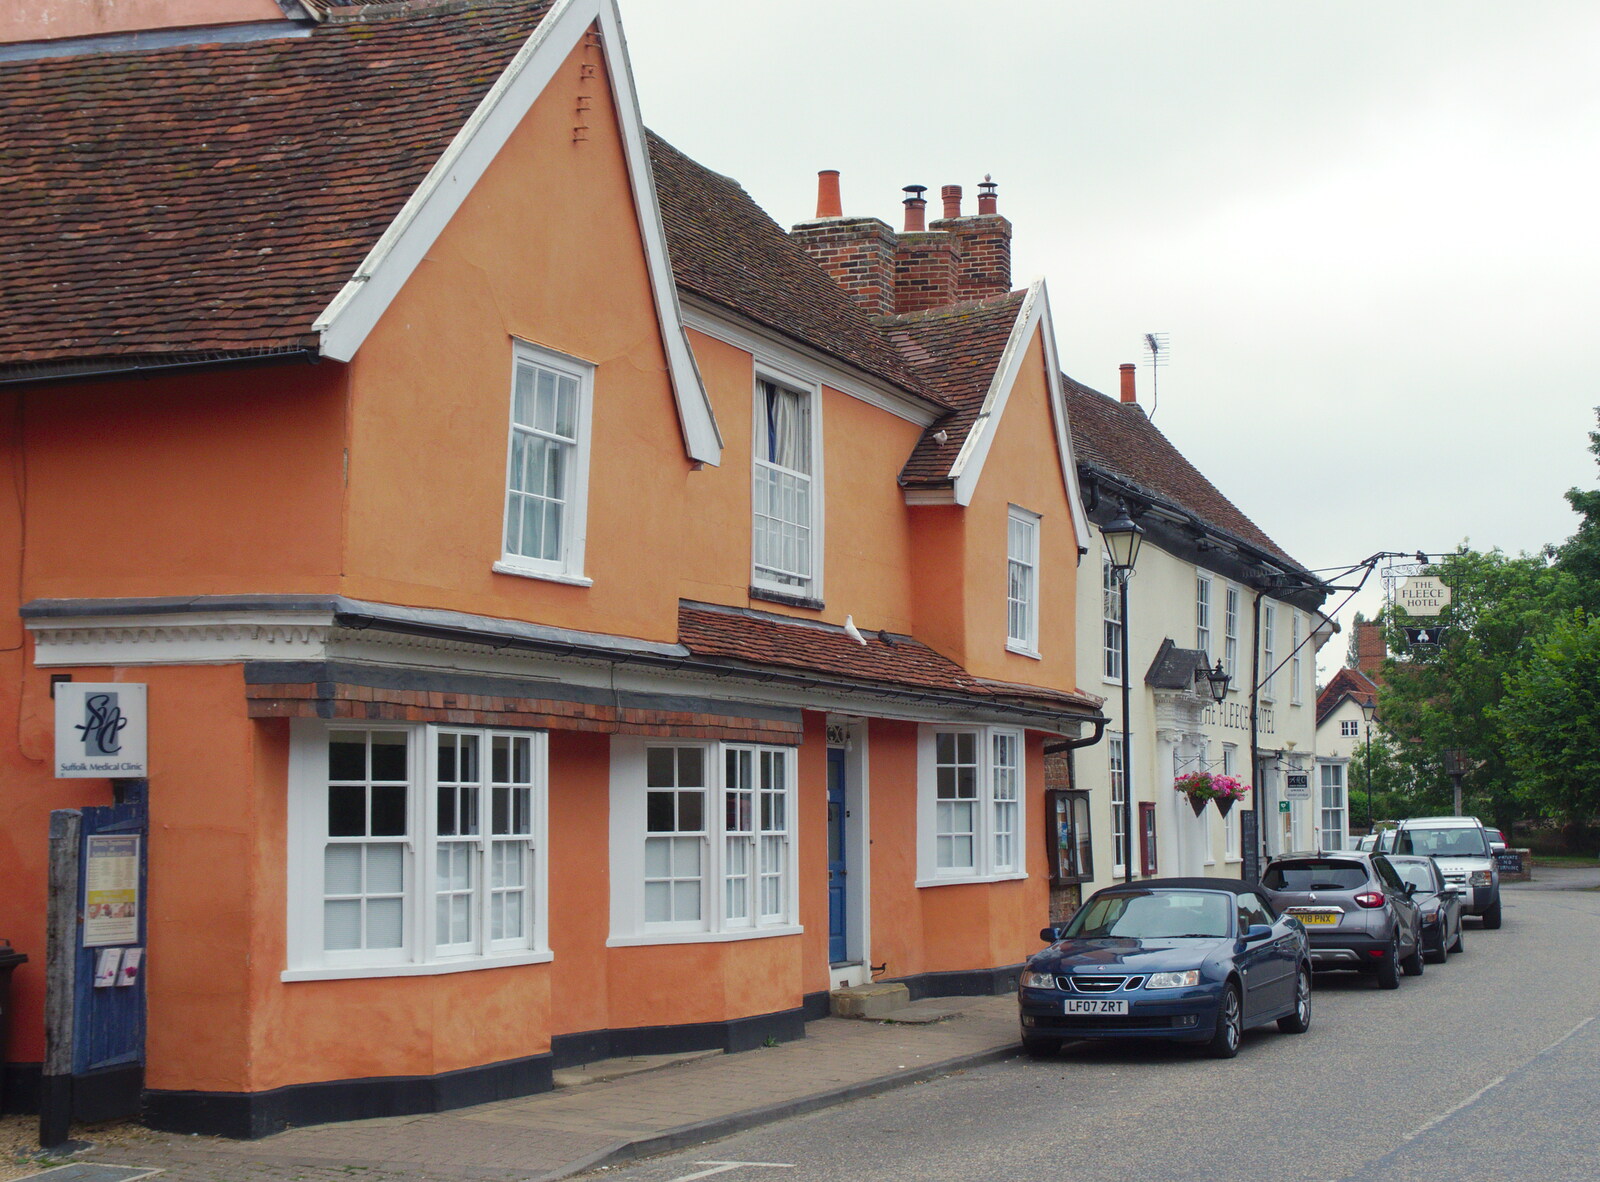 A Postcard from Boxford and BSCC at Pulham, Suffolk and Norfolk - 13th July 2019: An orange house by the Fleece Hotel